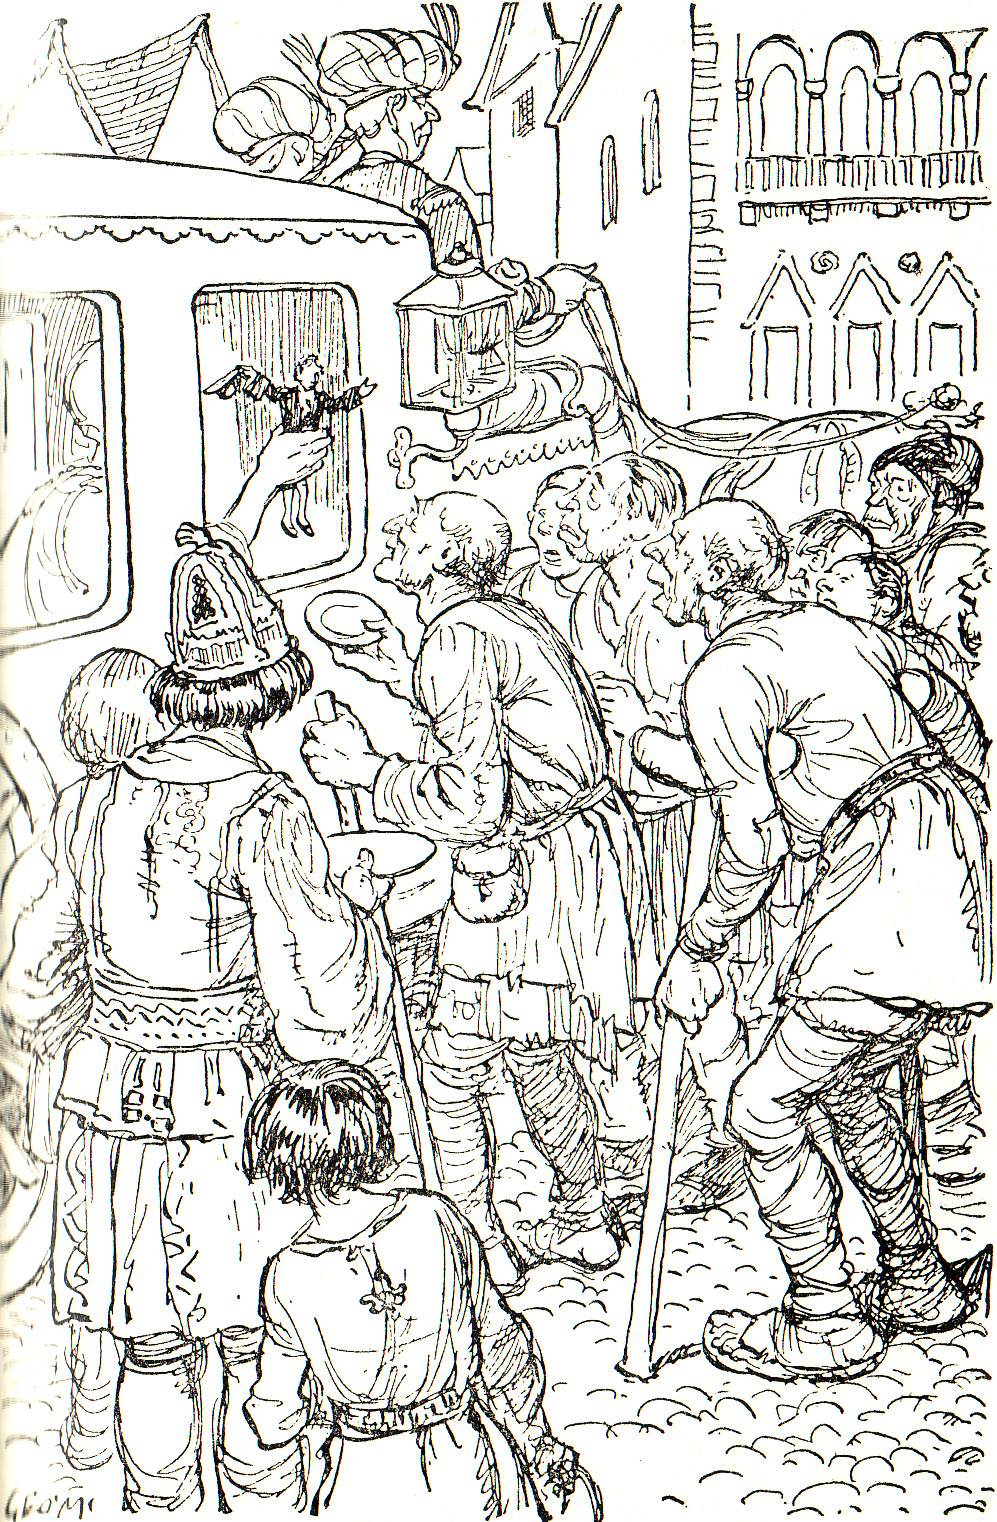 From Chapter 4 - A Voyage To Brobdingnag (Gulliver's Travels) illustrated by George Morrow